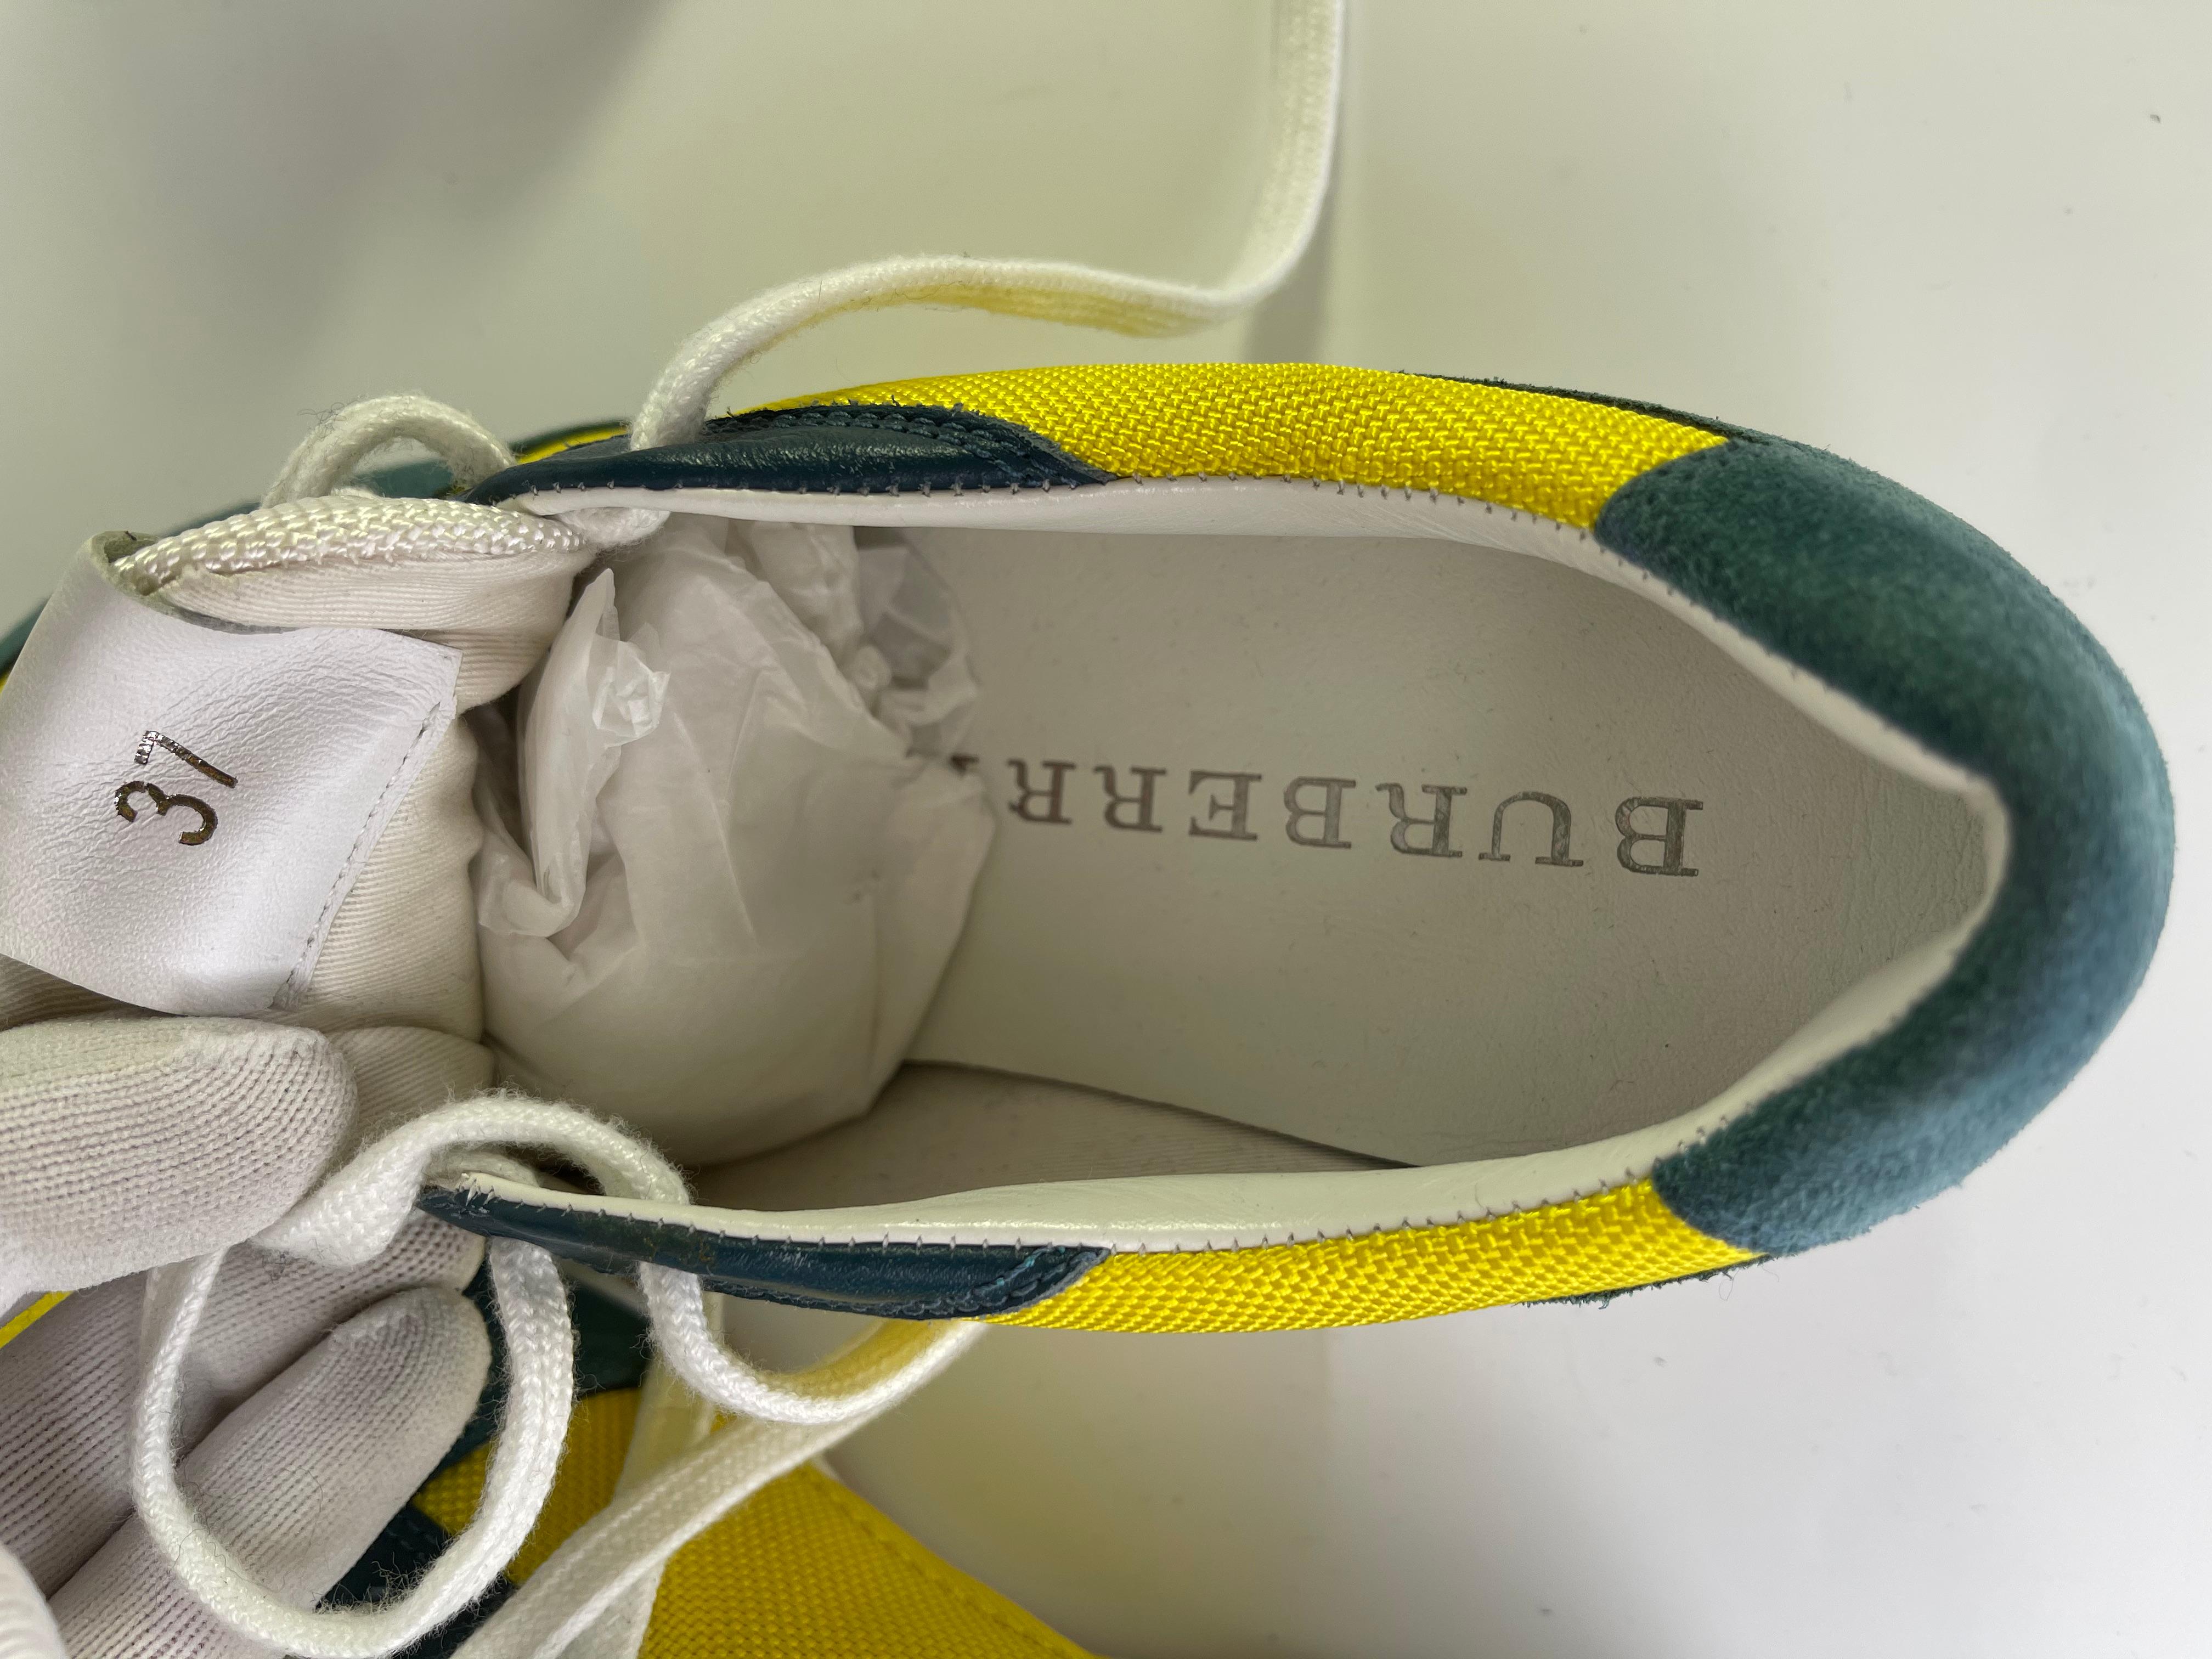 Burberry Nylon Suede Pop Sneakers Womens (37 EU) In New Condition For Sale In Montreal, Quebec